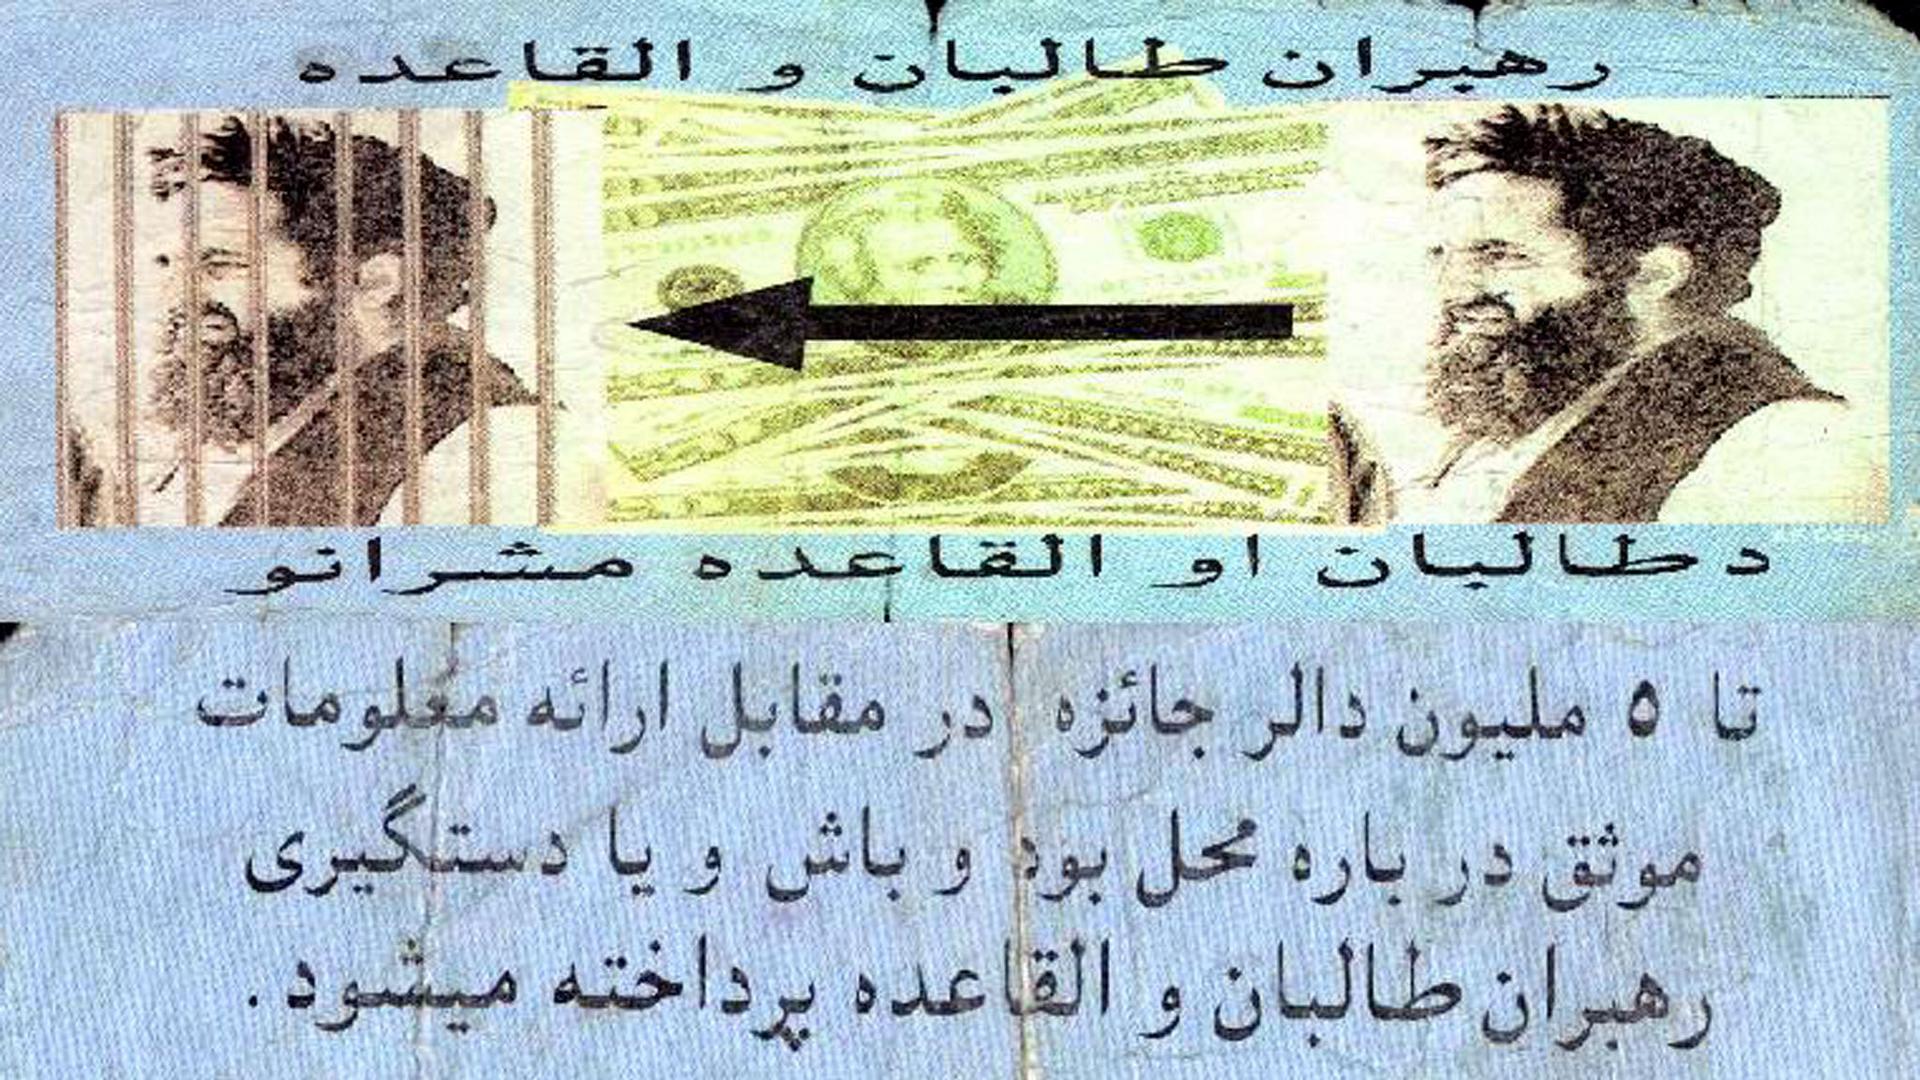 A US leaflet from 2002 with a picture of Mullah Omar offering a $5m reward “for authentic information, that could lead to the arrest of Taliban, and al Qaeda leaders.”